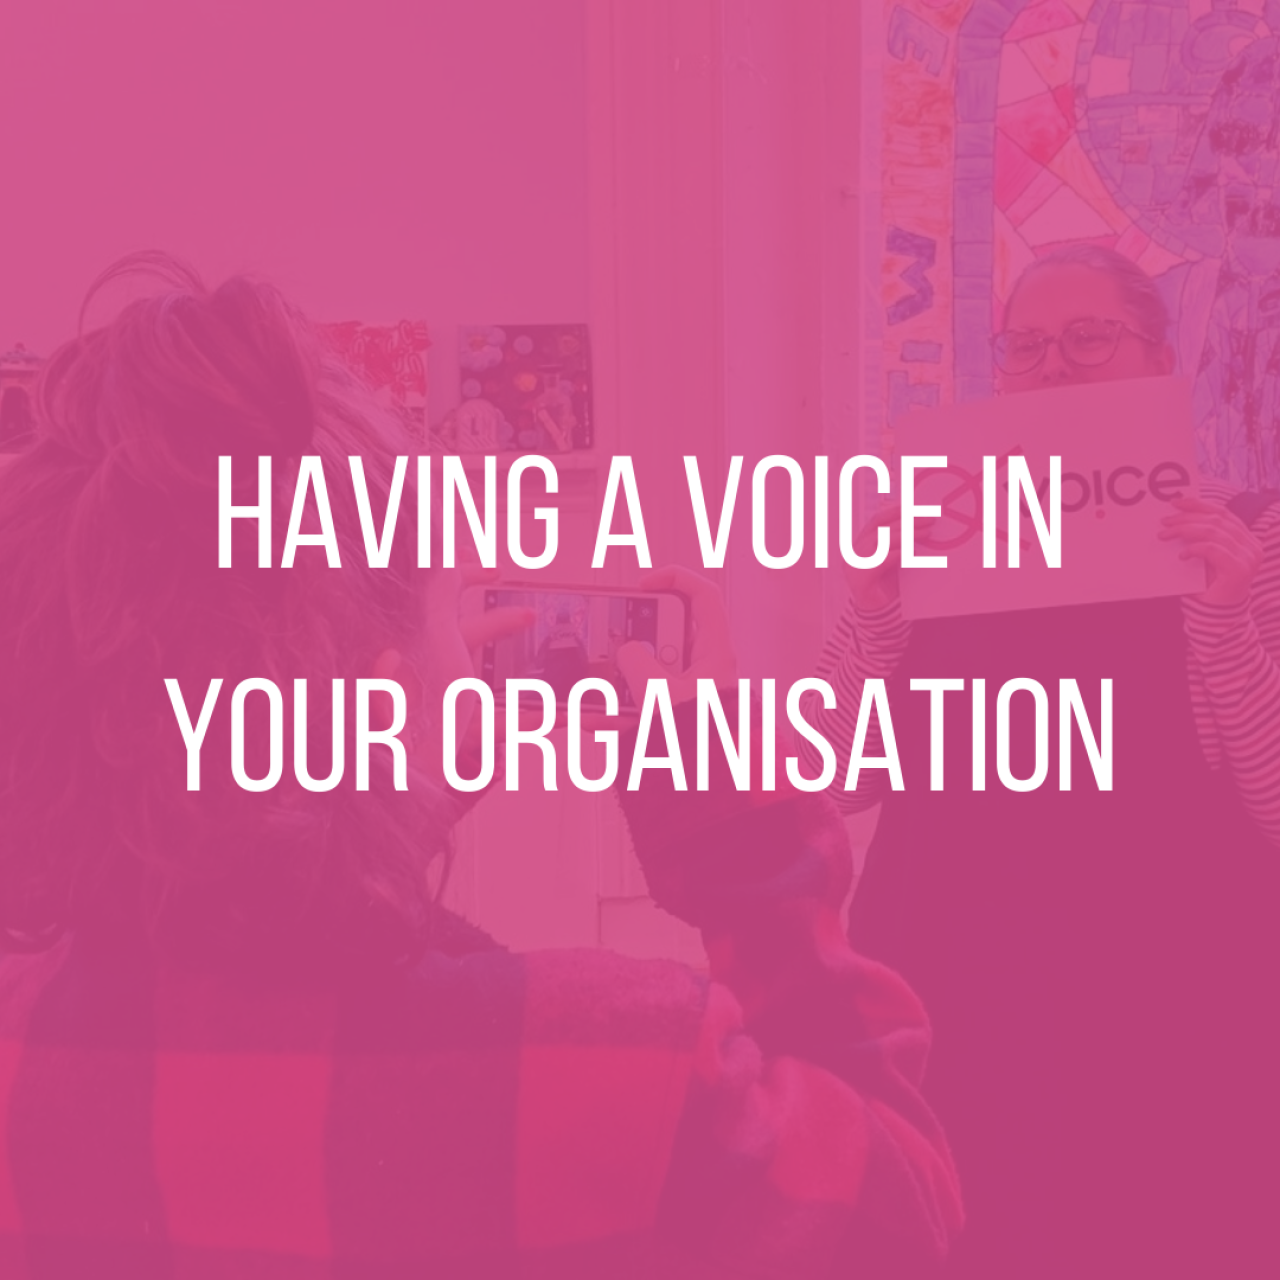 Having a voice in your organisation.